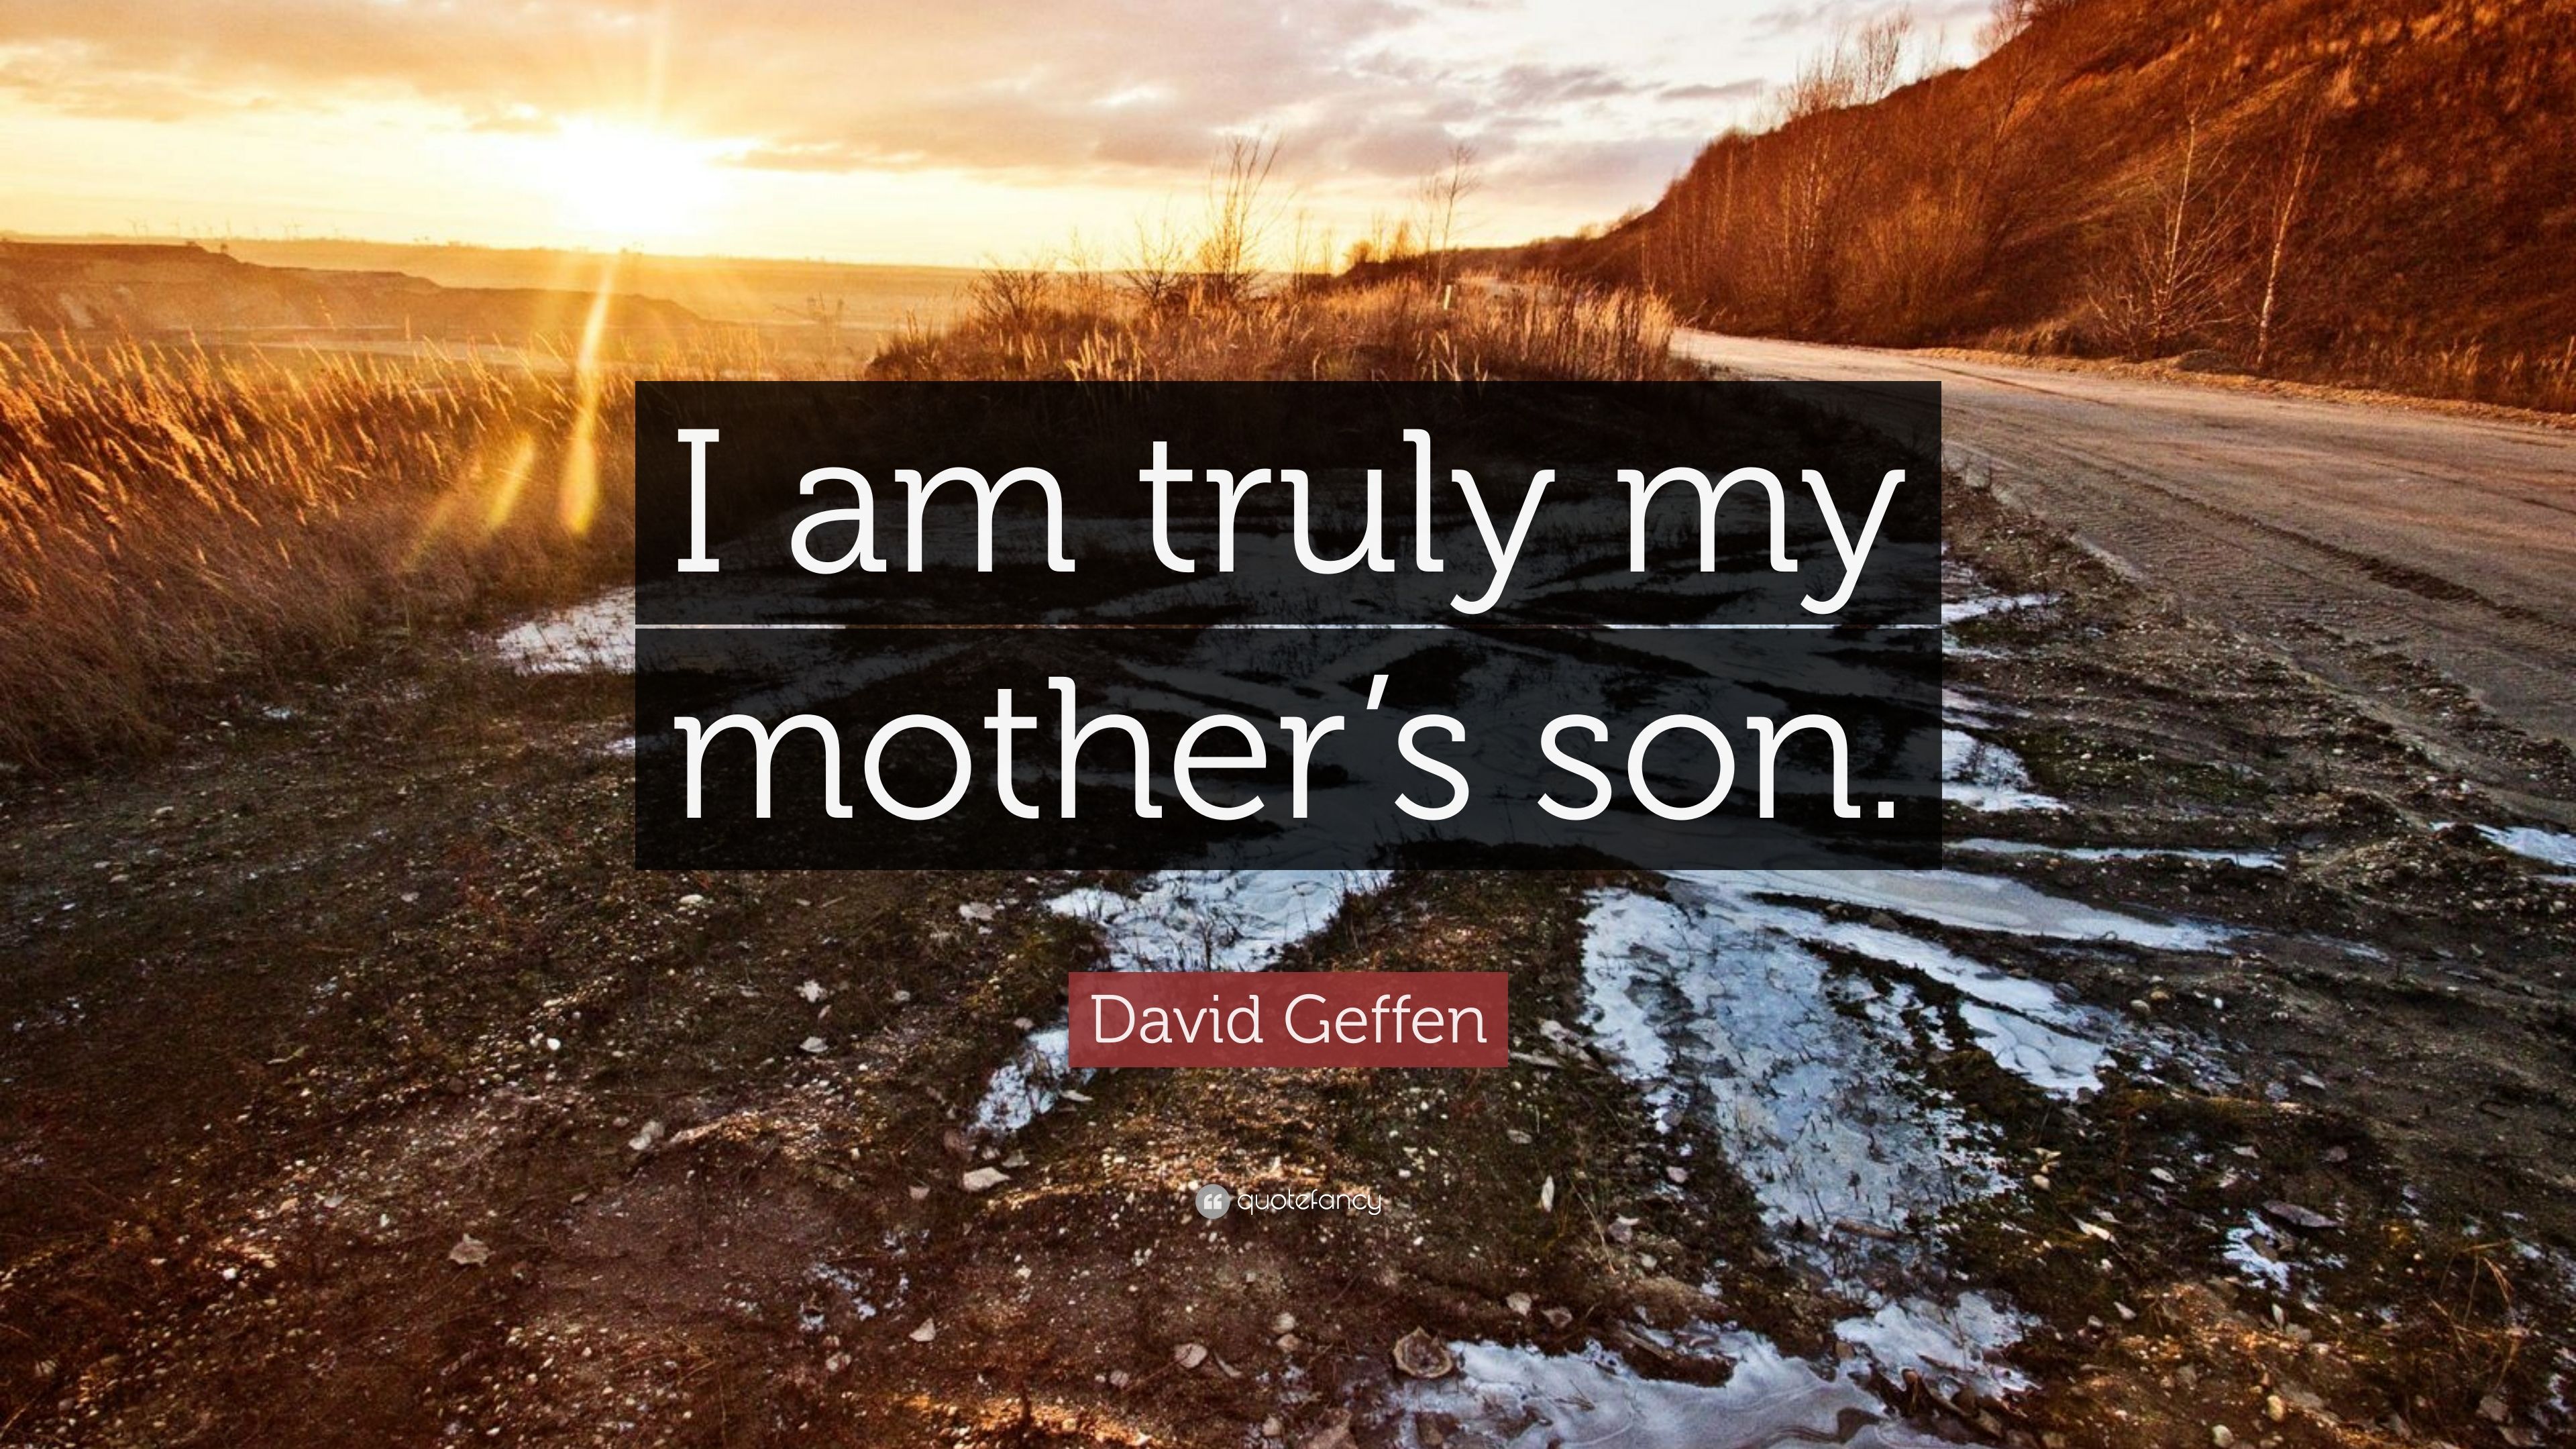 David Geffen Quote: “I am truly my mother's son.” (7 wallpaper)